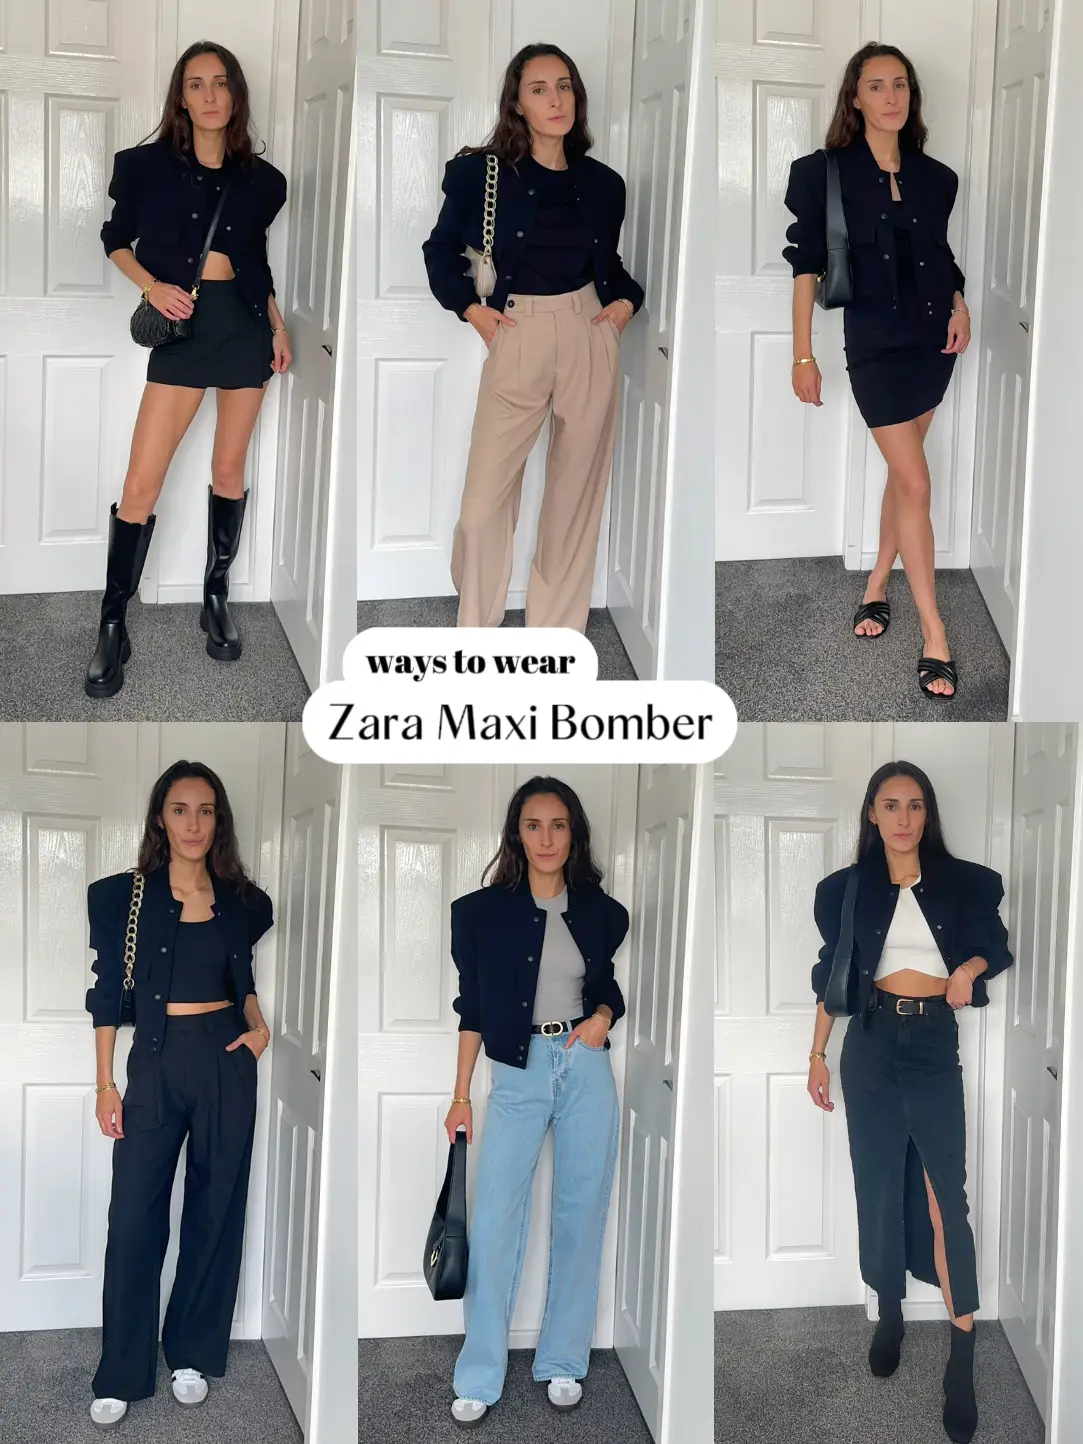 How to Wear the £13 Zara Bodysuit That's Gone Viral